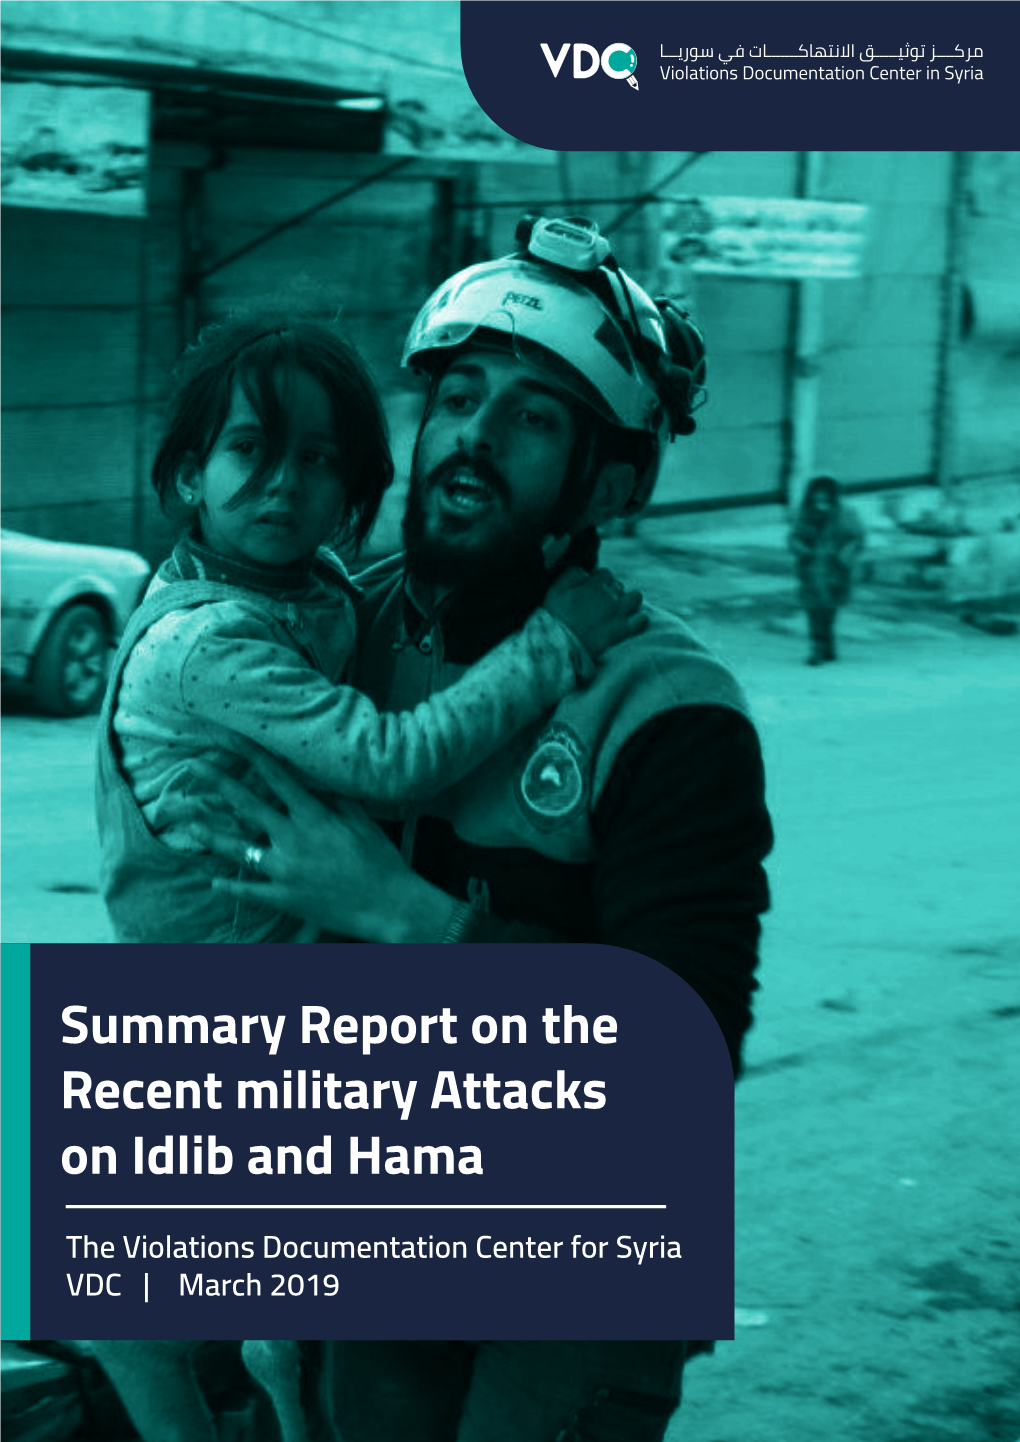 Summary Report on the Recent Military Attacks on Idlib and Hama